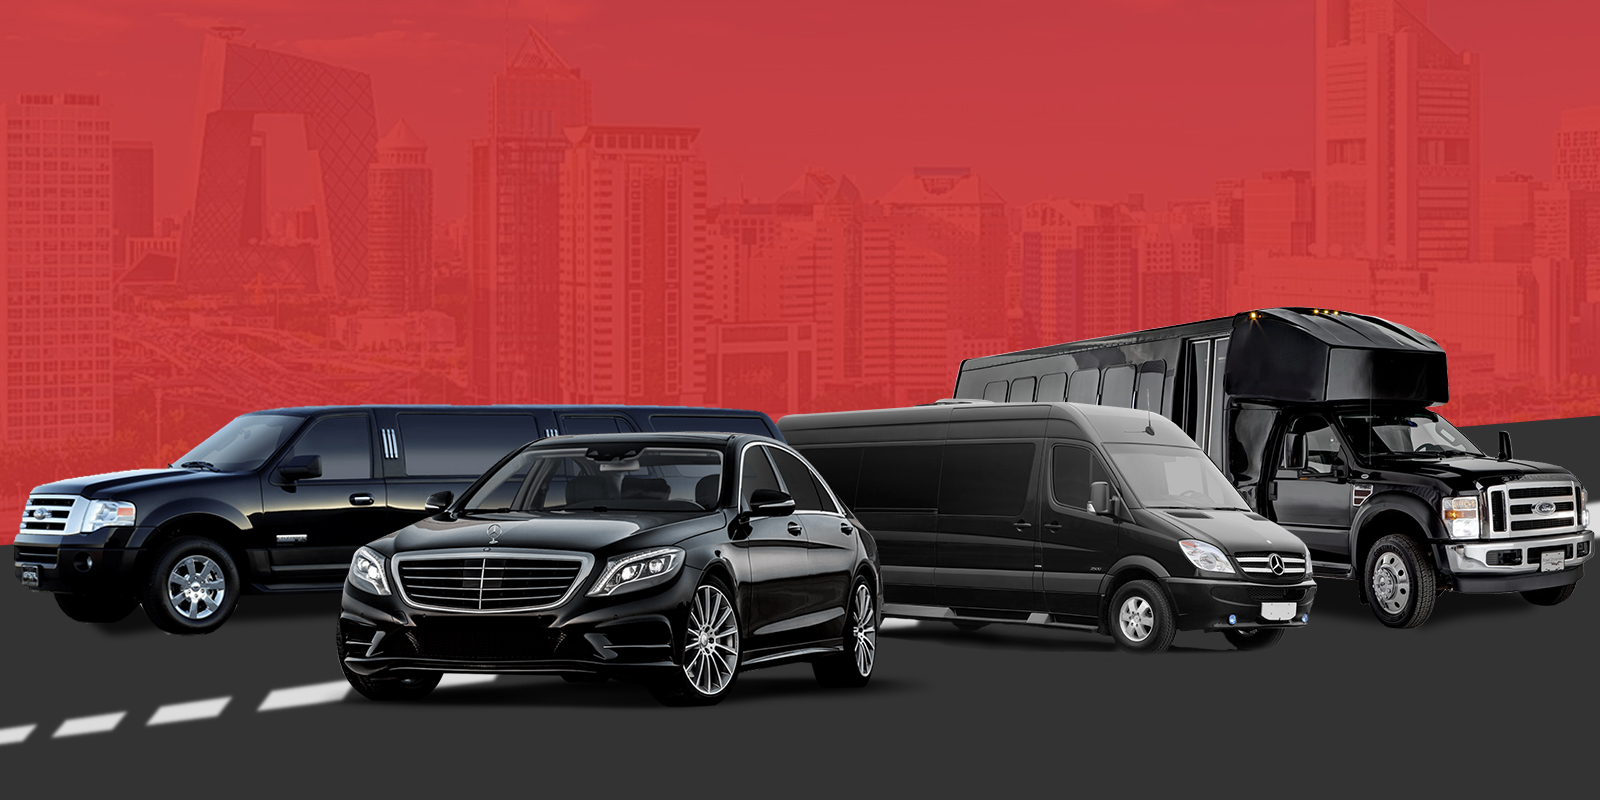 How Much Does It Cost To Rent A Limo?